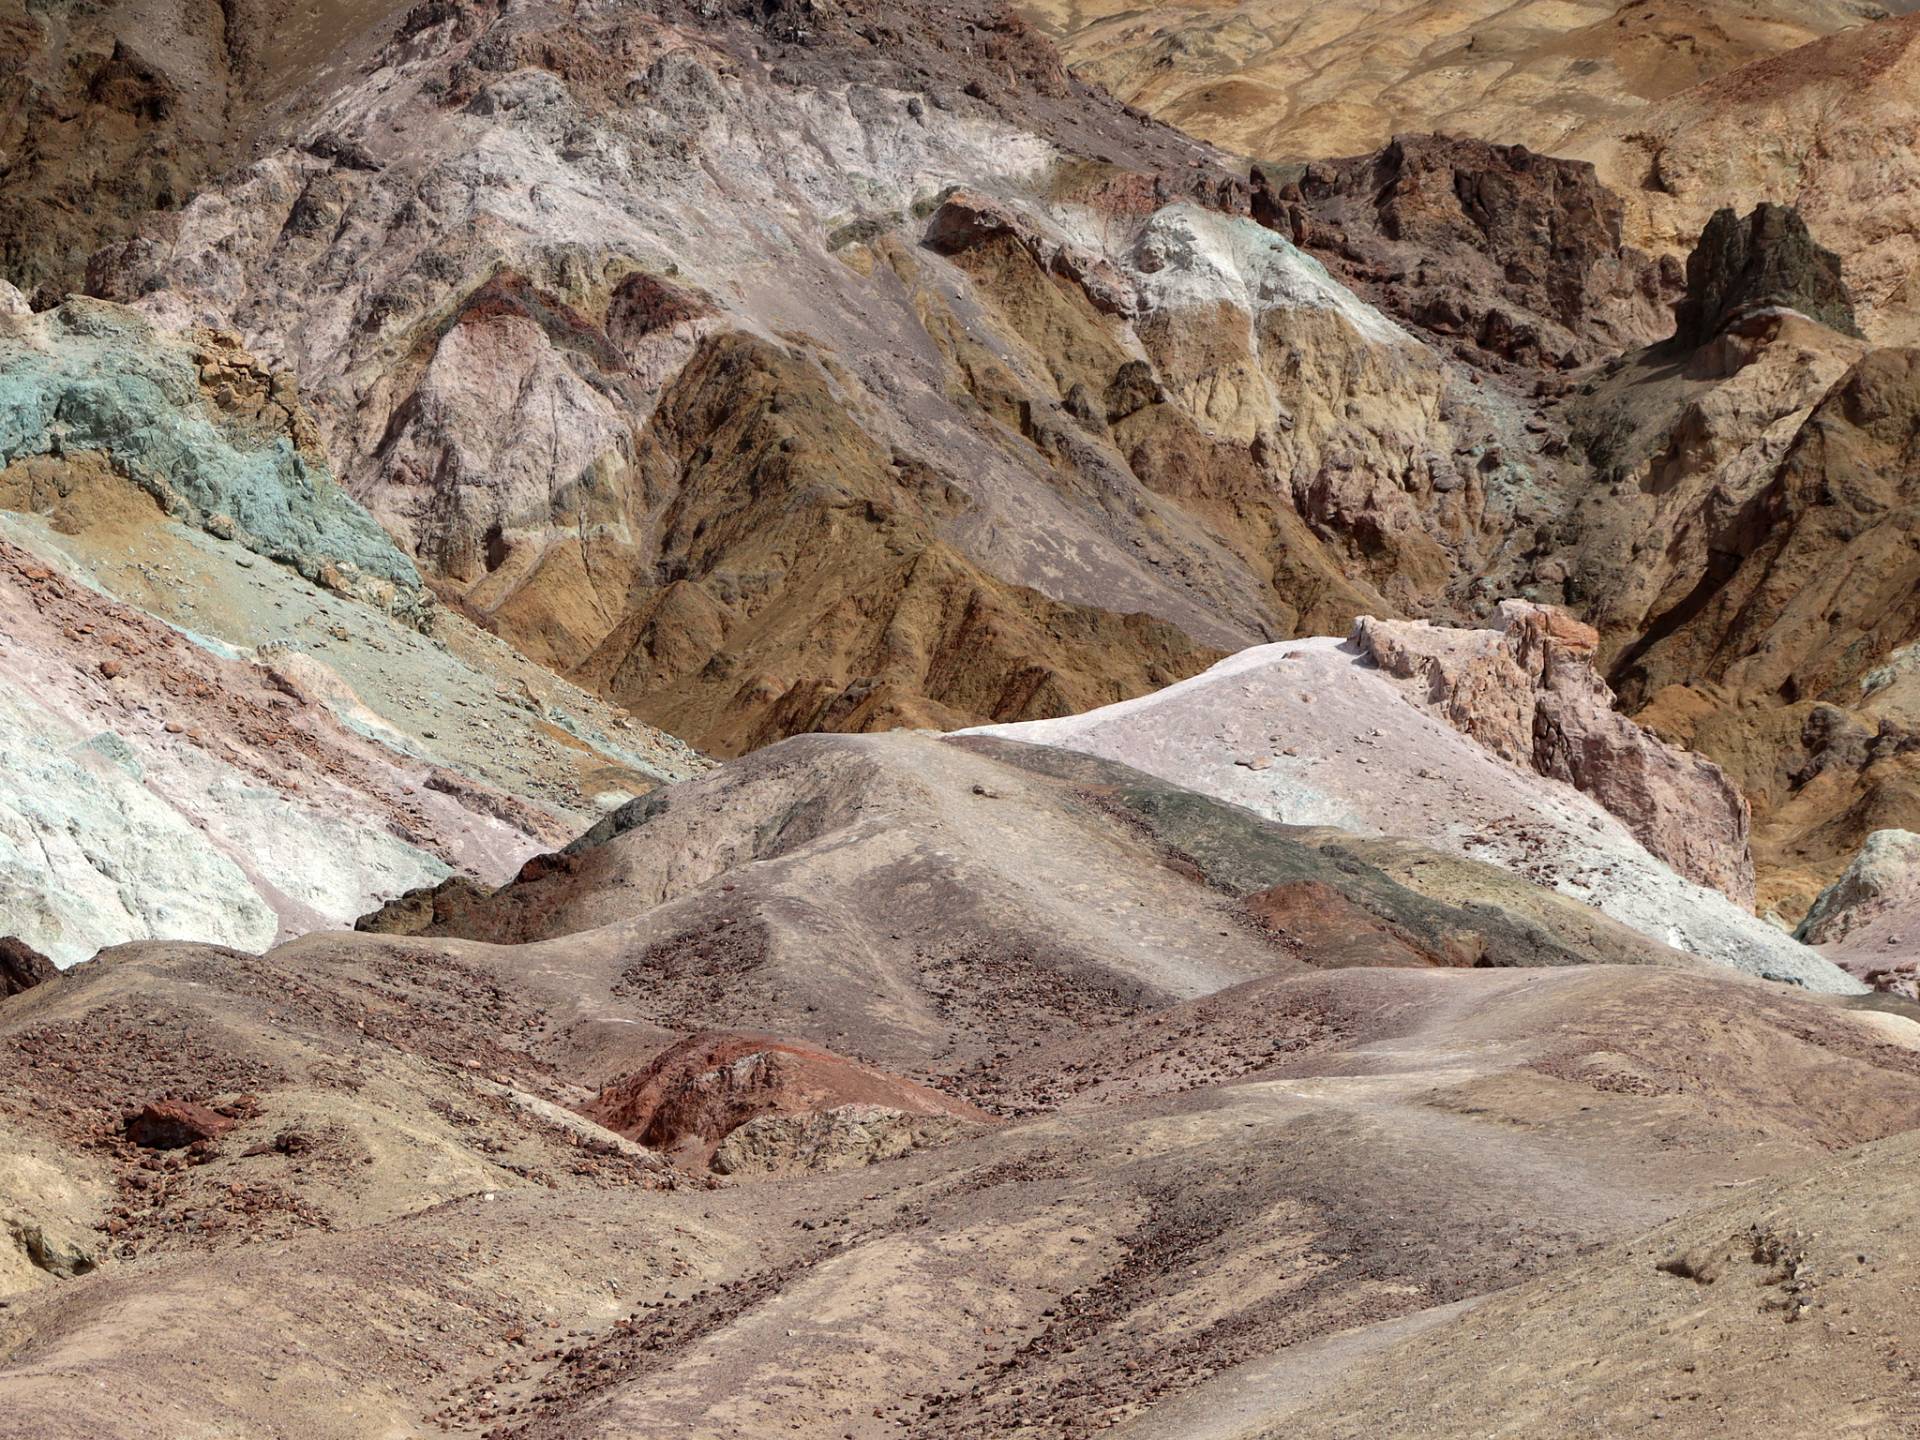 Artists Palette, Death Valley National Park, California